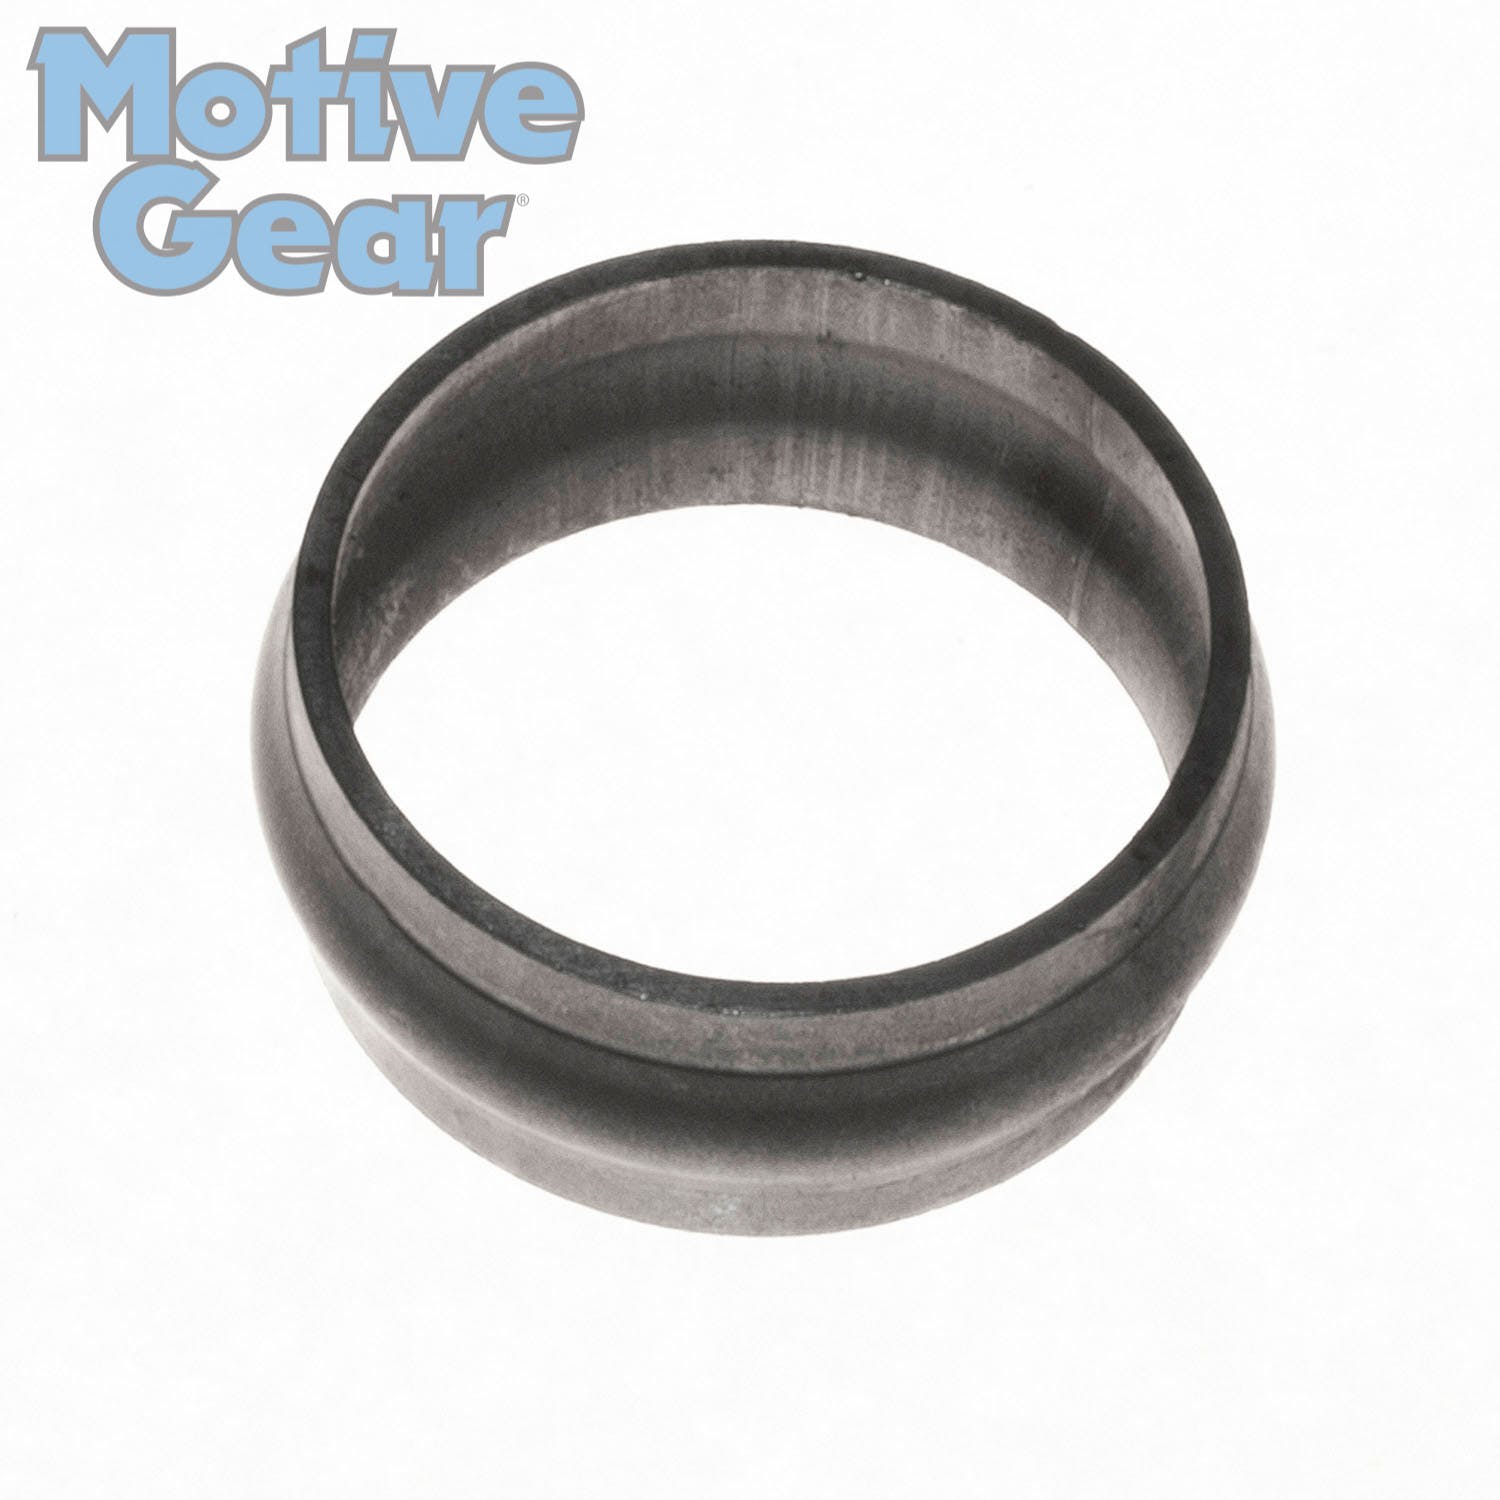 Motive Gear 3977355 Differential Crush Sleeve